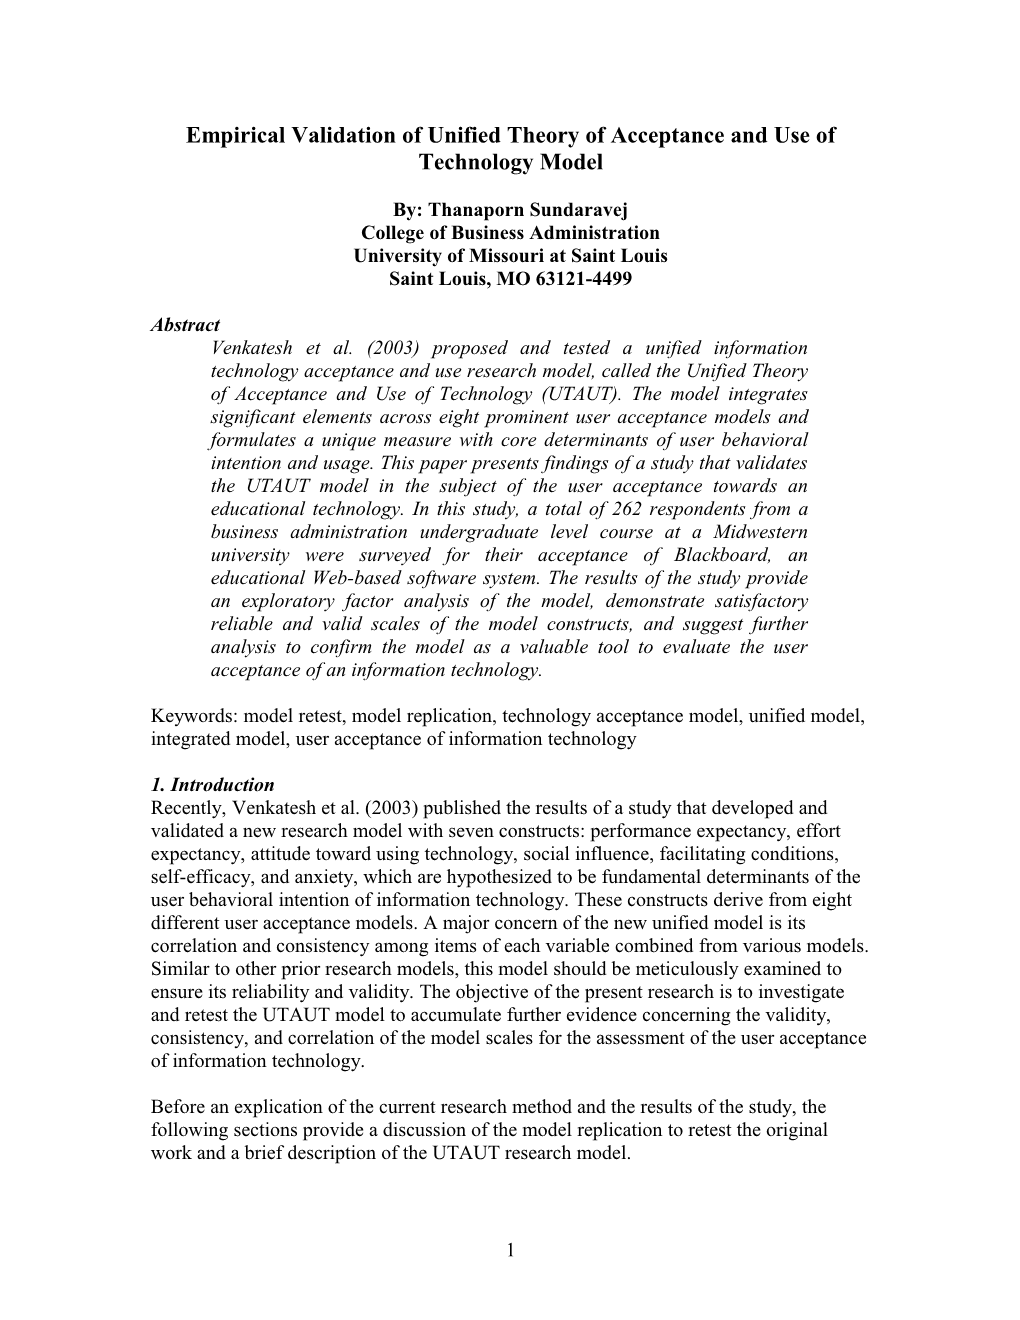 Empirical Validation Of Unified Theory Of Acceptance And Use Of Technology Model